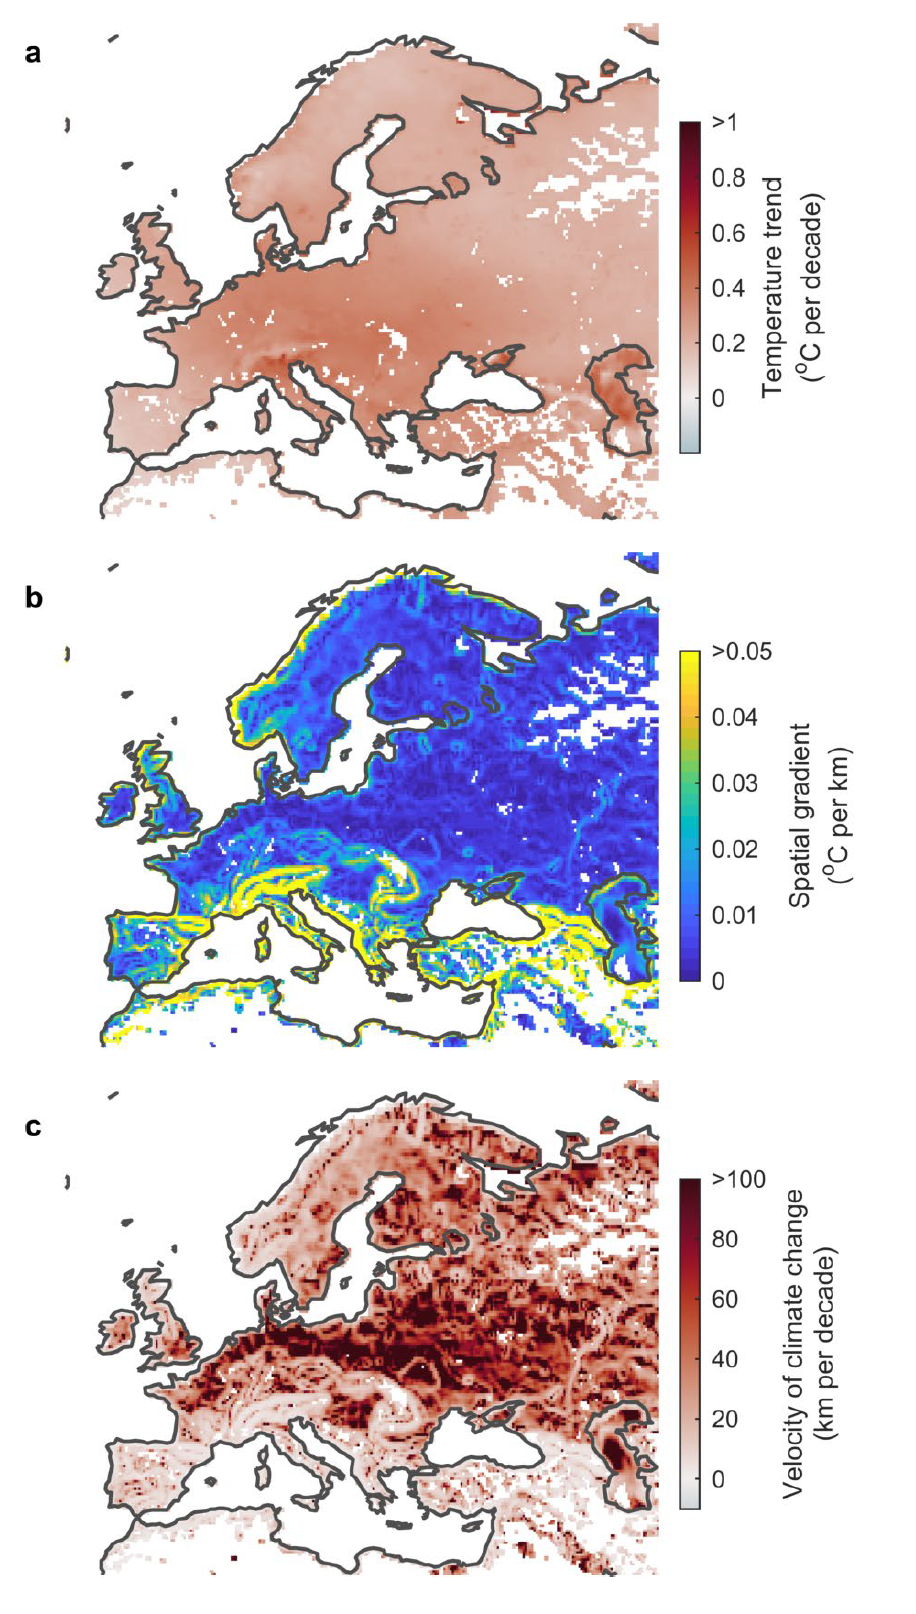 The velocity of climate change in European standing waters